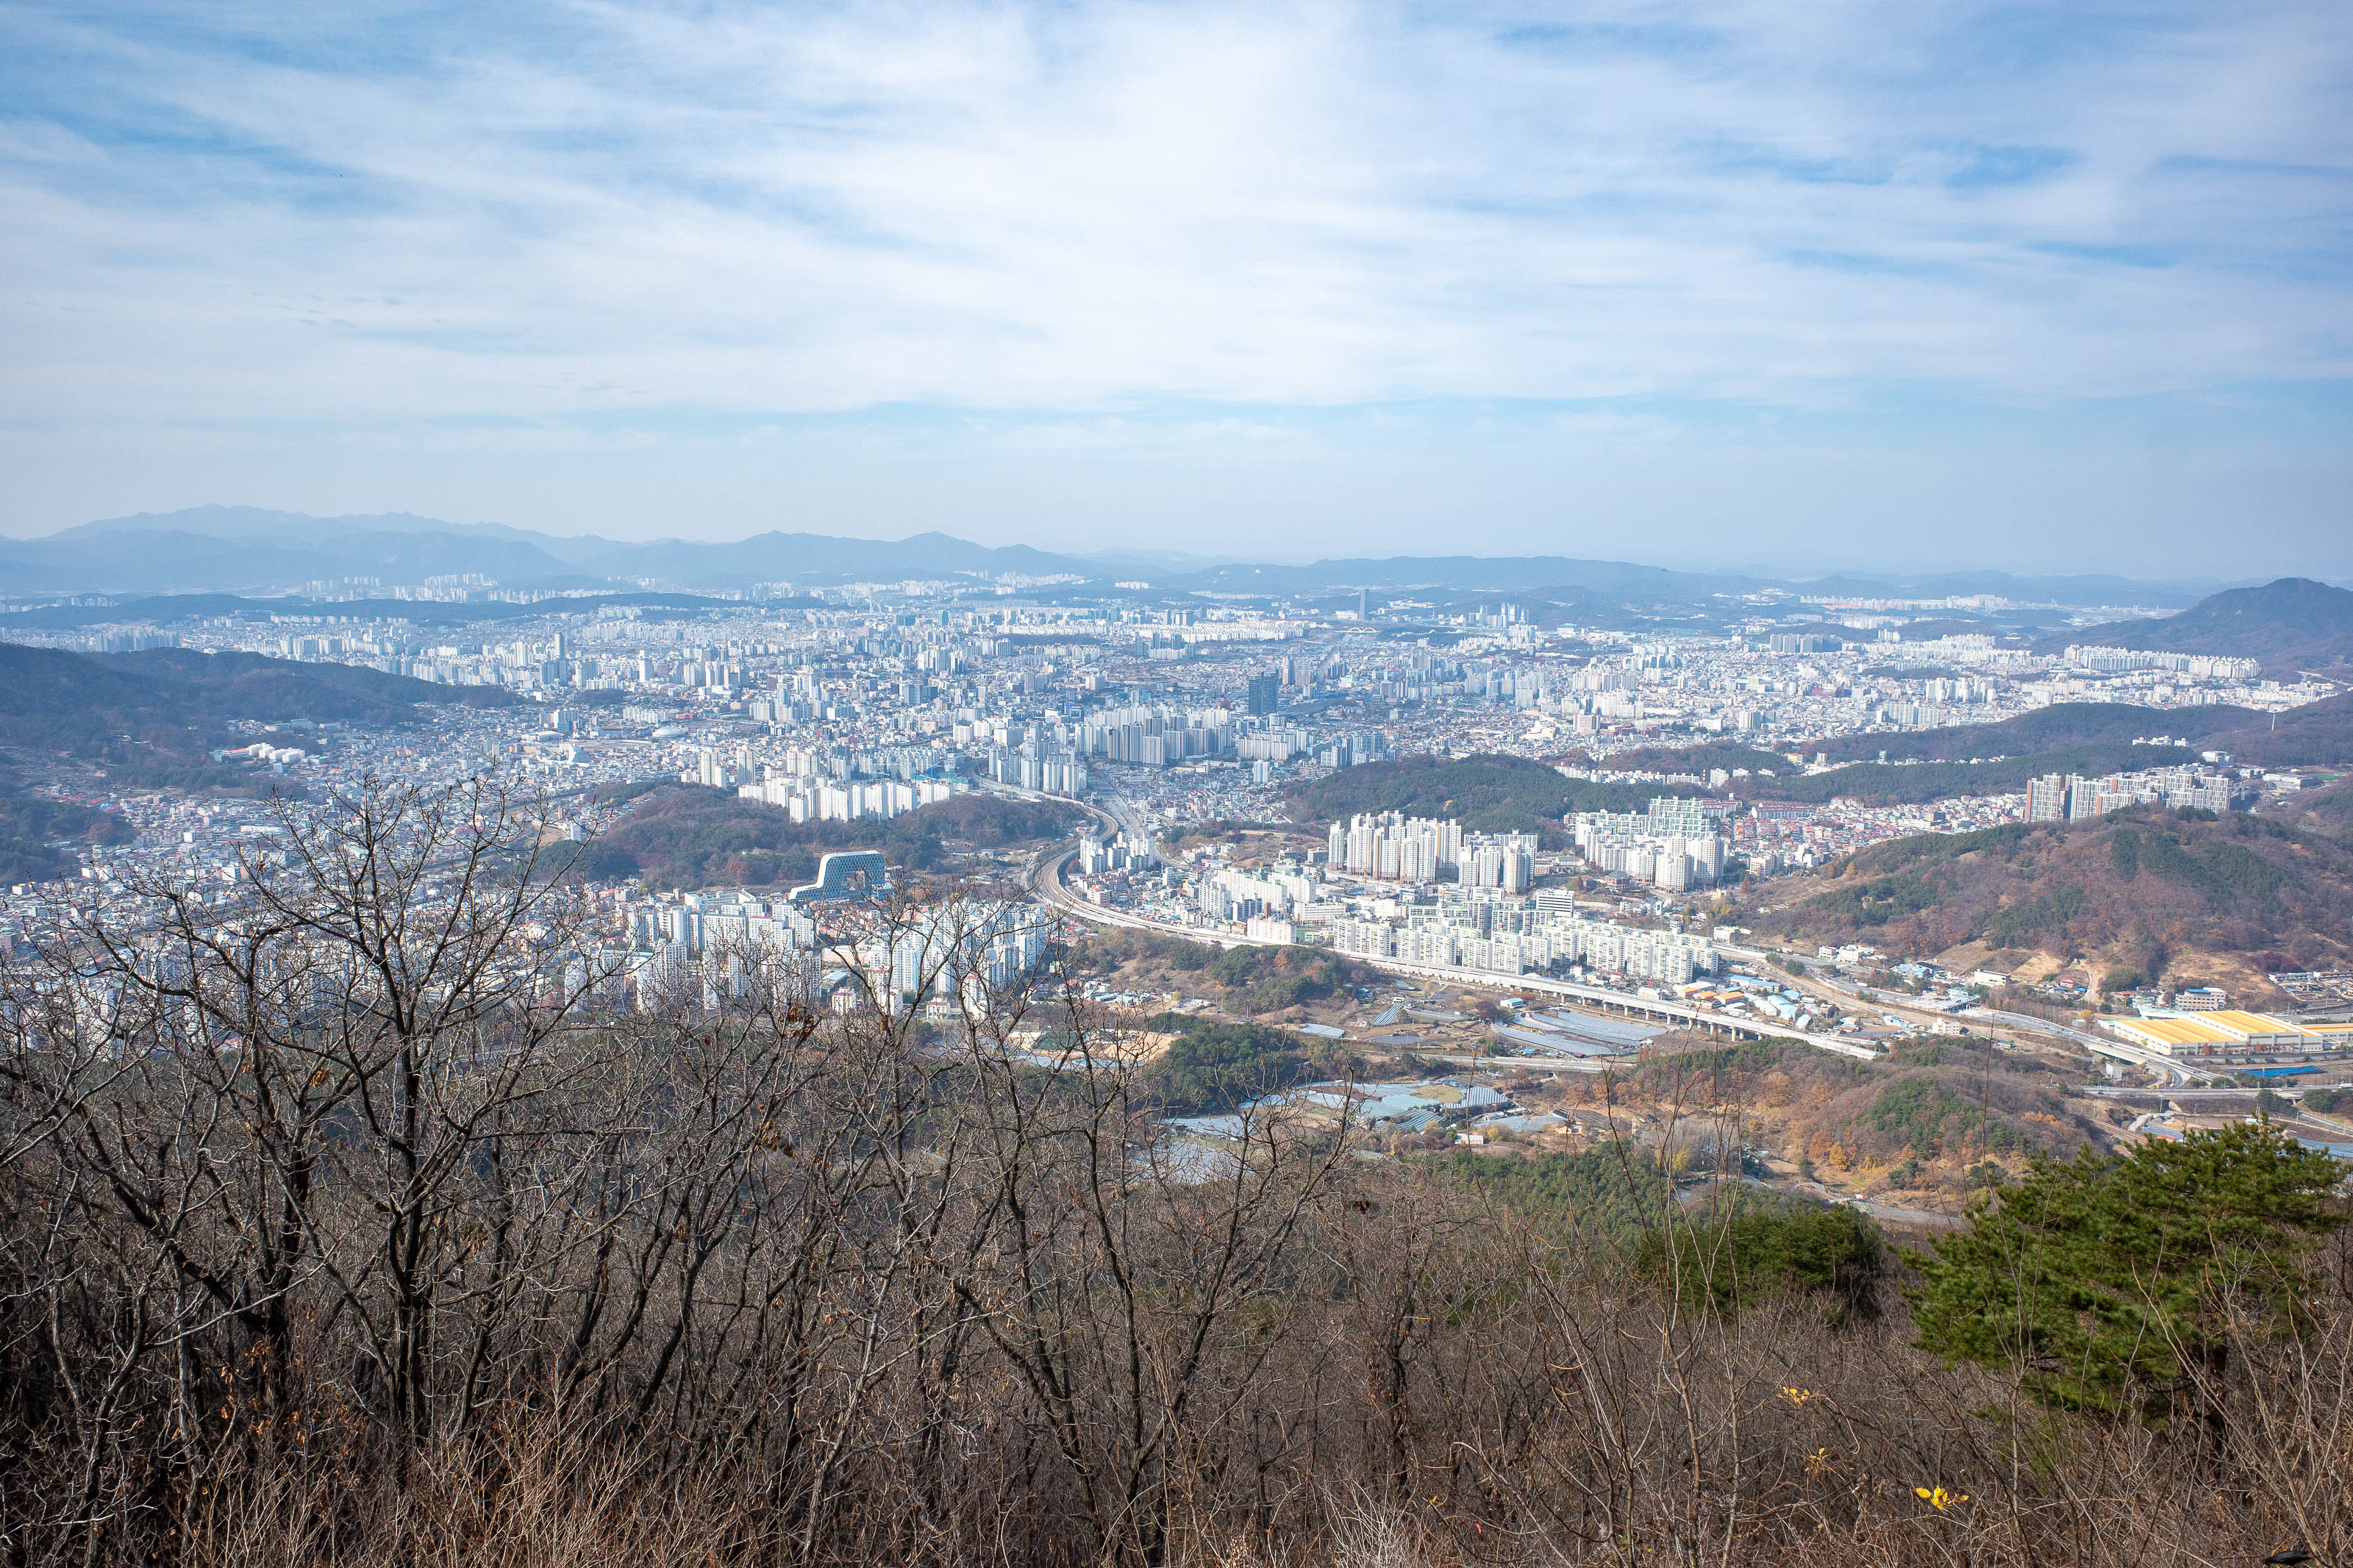 Korean-Hiking-Daejeon-Bomunsan - 'One of the views of Daejeon' is how this view was advertised on the Daejeon travel website.